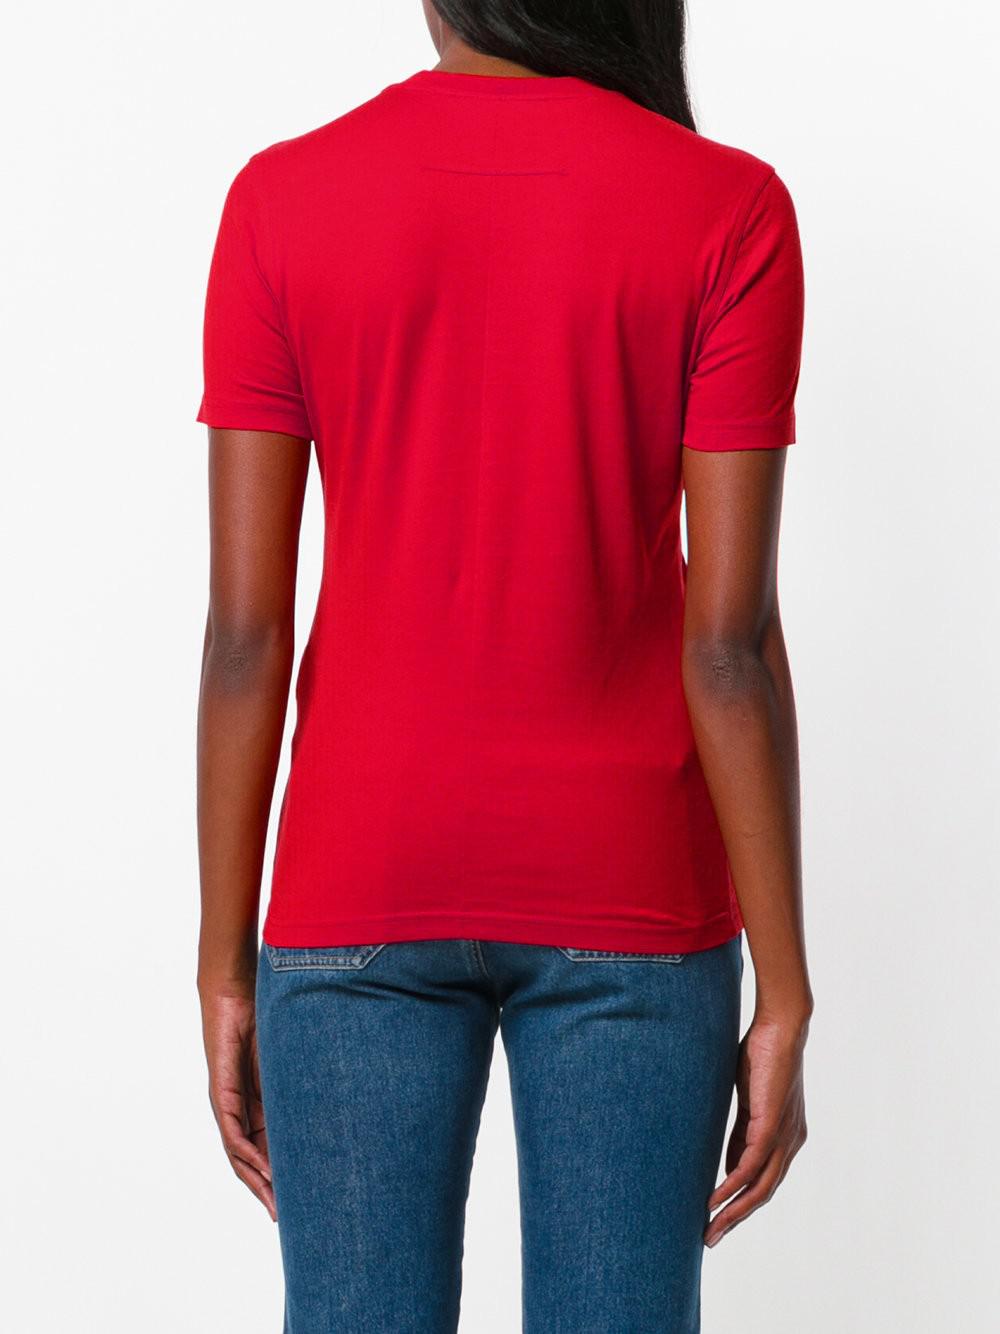 Total 42+ imagen red givenchy shirt women’s